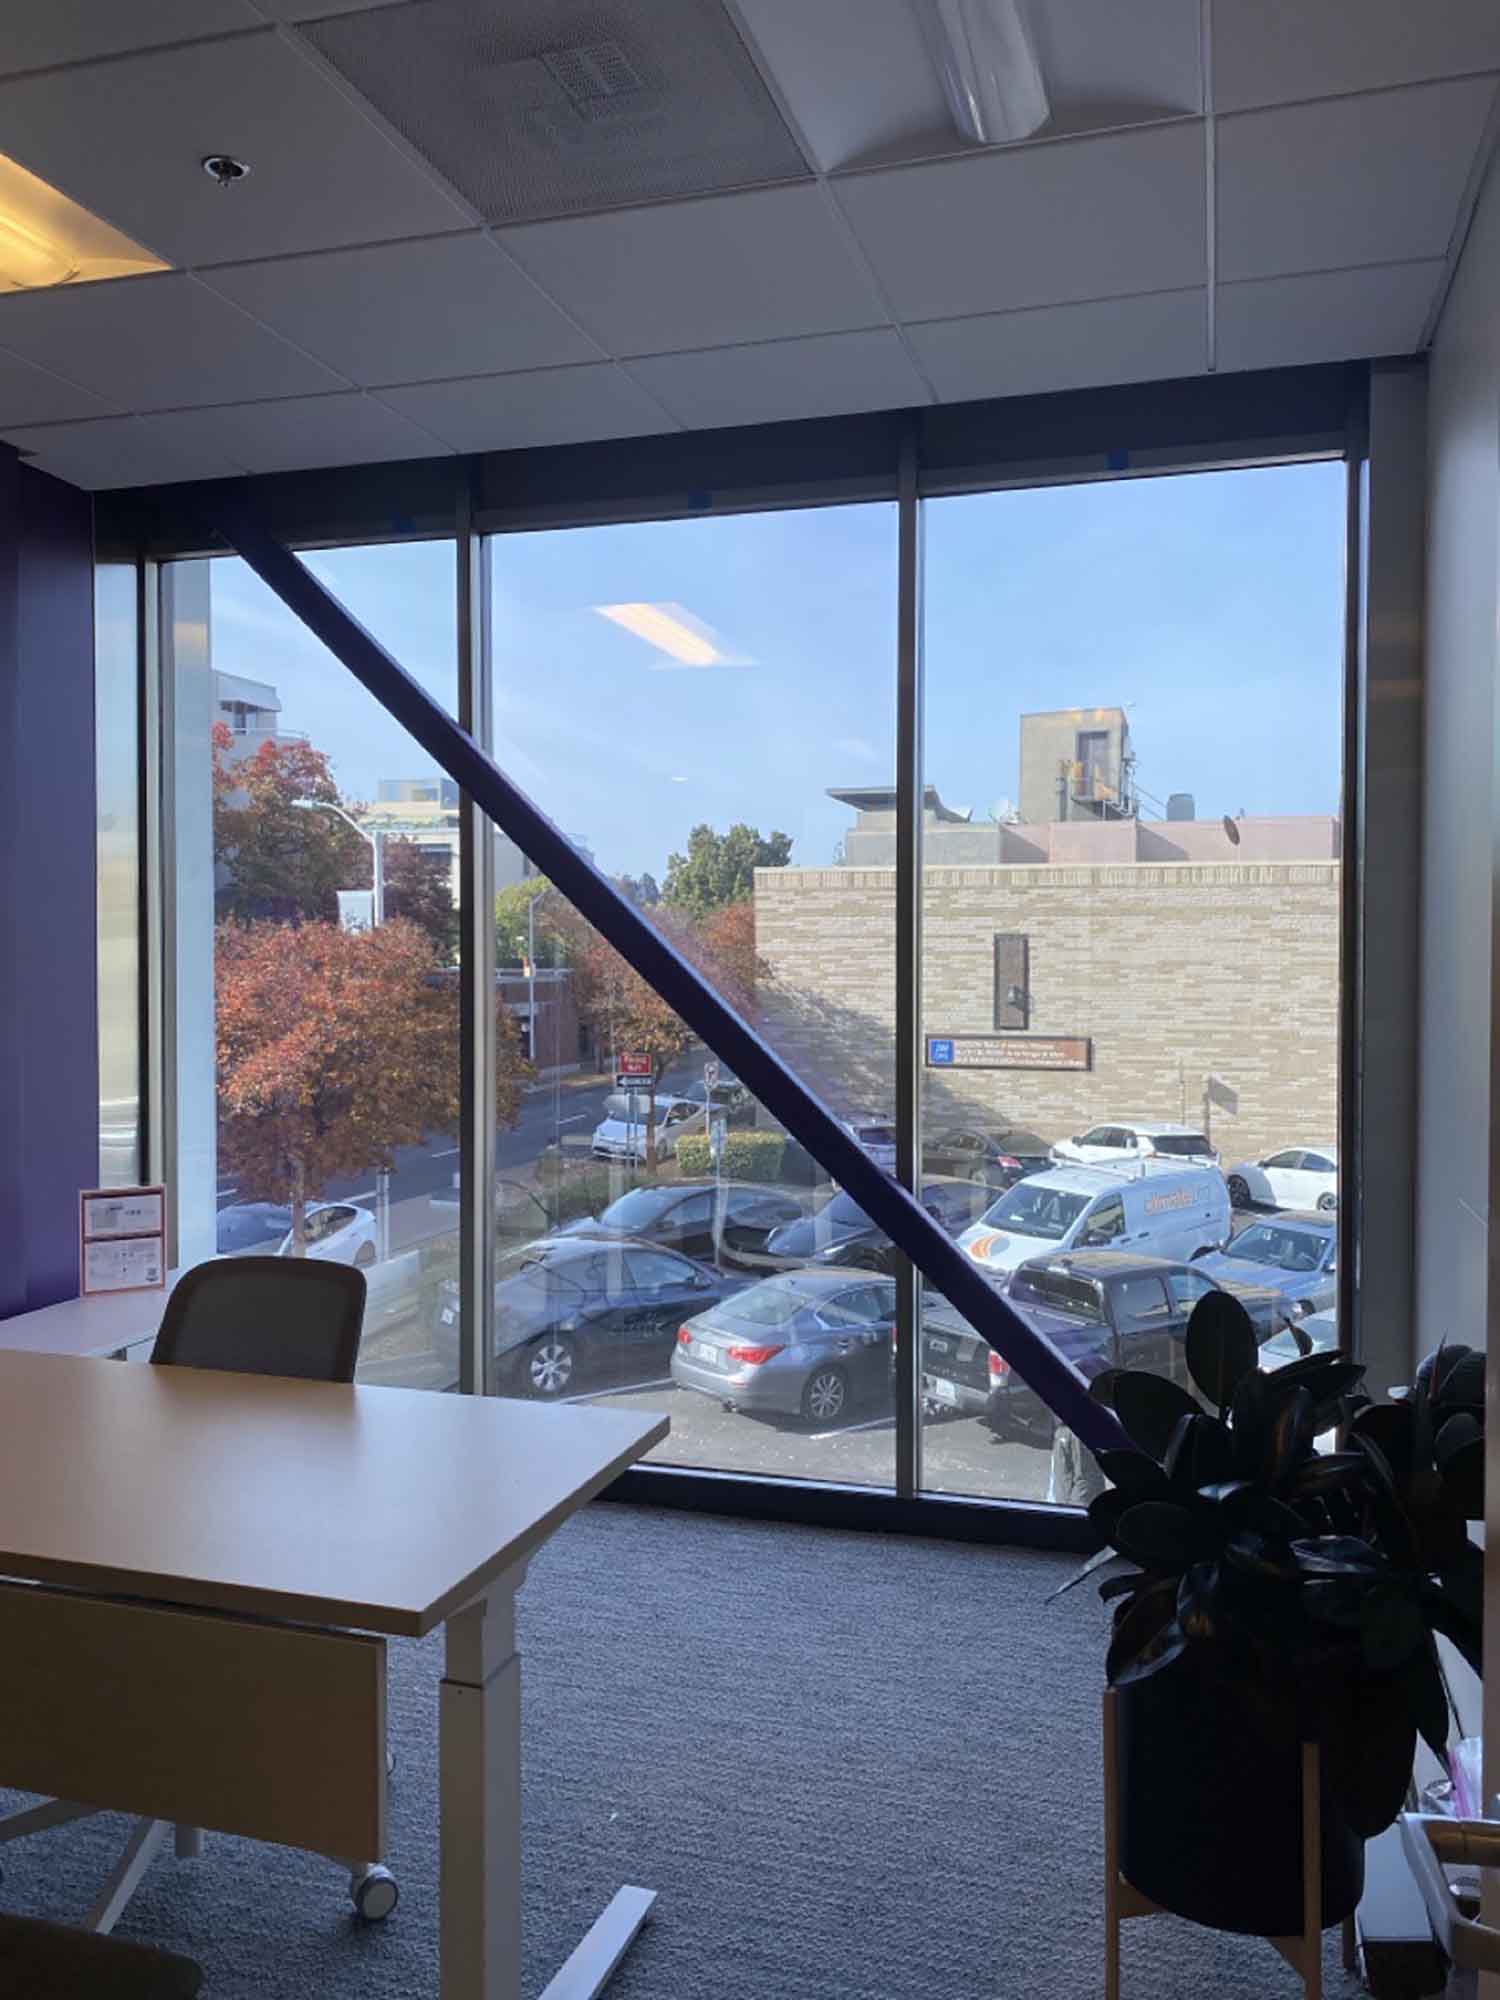 ClimatePro Installs Window Tint For A Palo Alto Offices. Get a free estimate in the San Francisco Bay Area today.